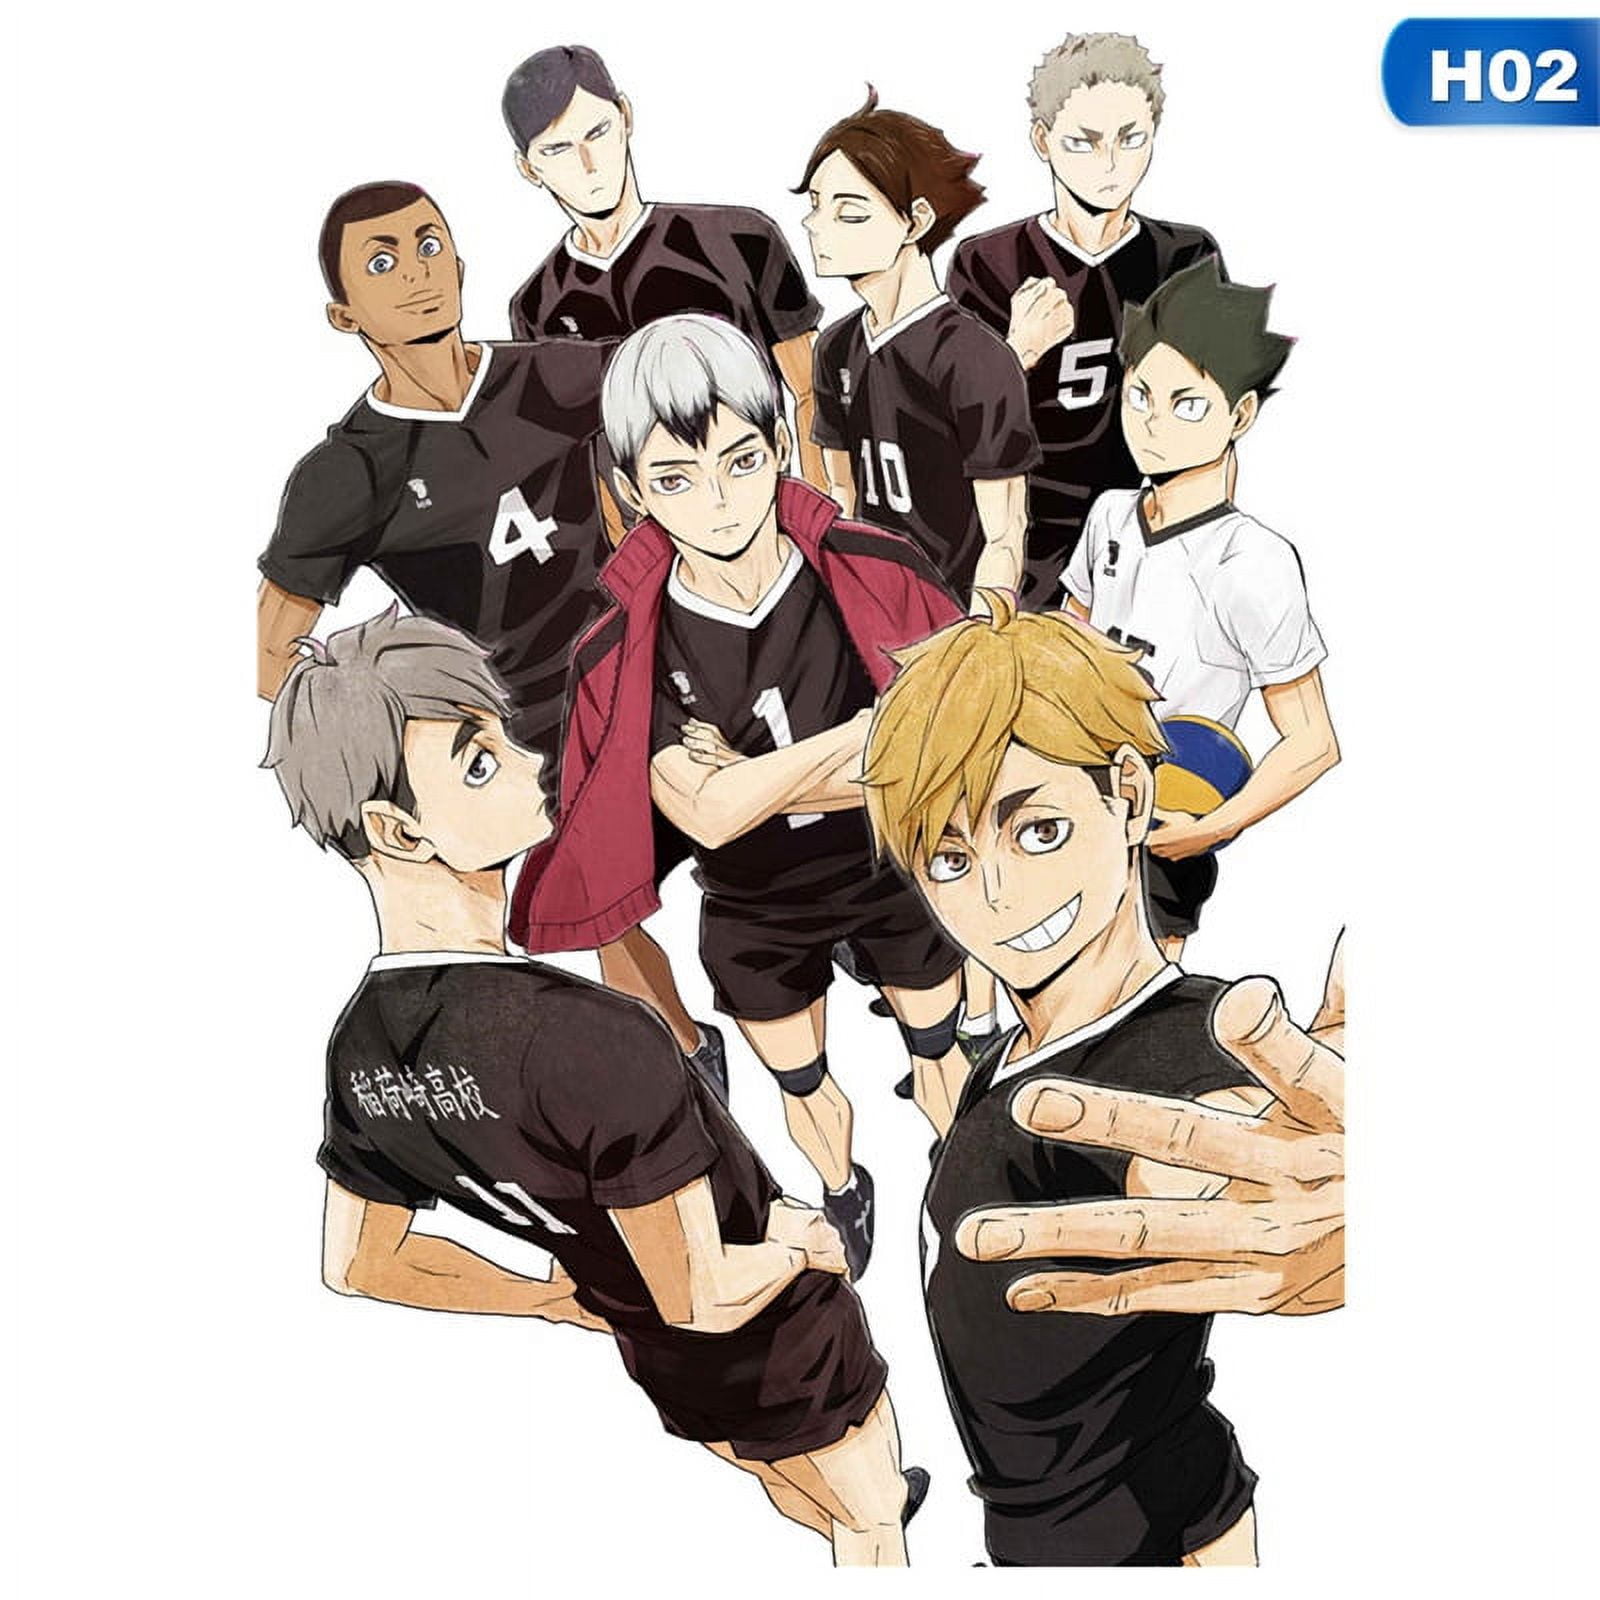 Riapawel Japanese Anime Theme Poster,Cool Anime Haikyuu Wall Art Print  Decor Posters Suitable for Boys Home Bedrooms Living Rooms  etc.16.5\x11.8\ 